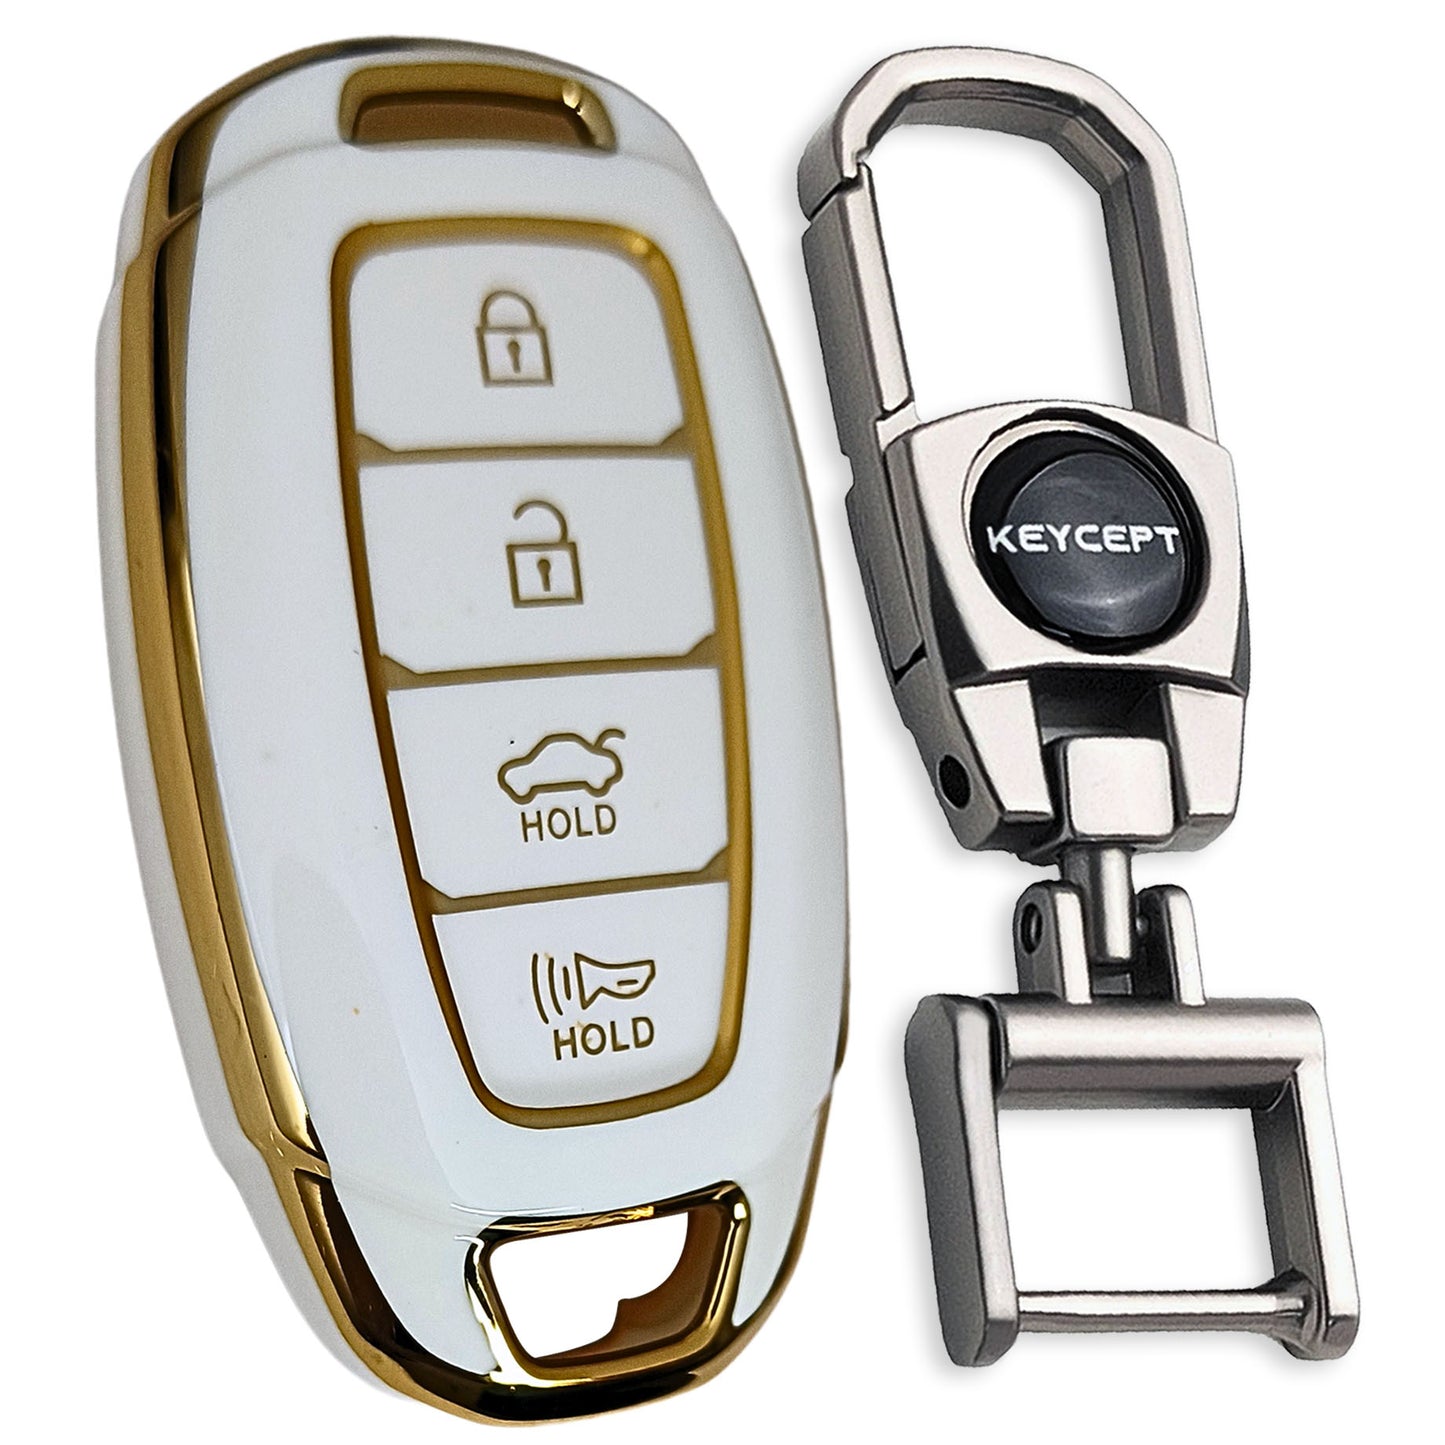 TPU Key Cover Compatible for Hyundai Verna | i20 4 Button Smart Key with Keychain 2